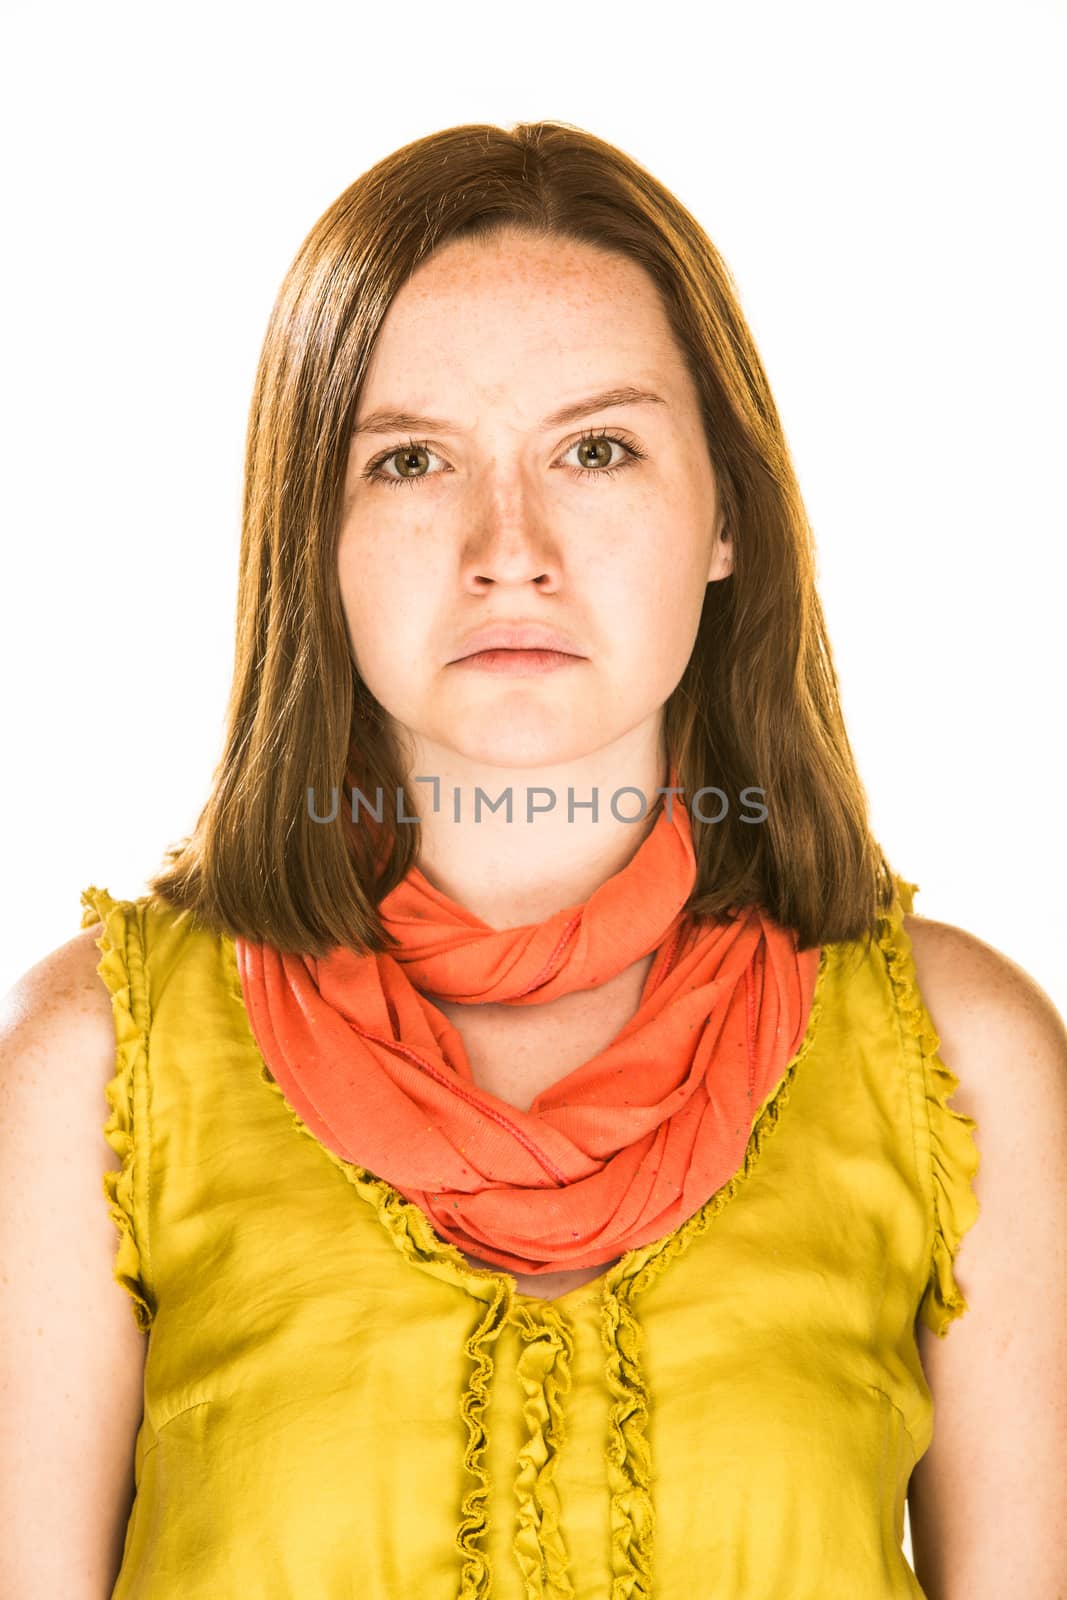 Pretty girl with an unhappy expression on white background